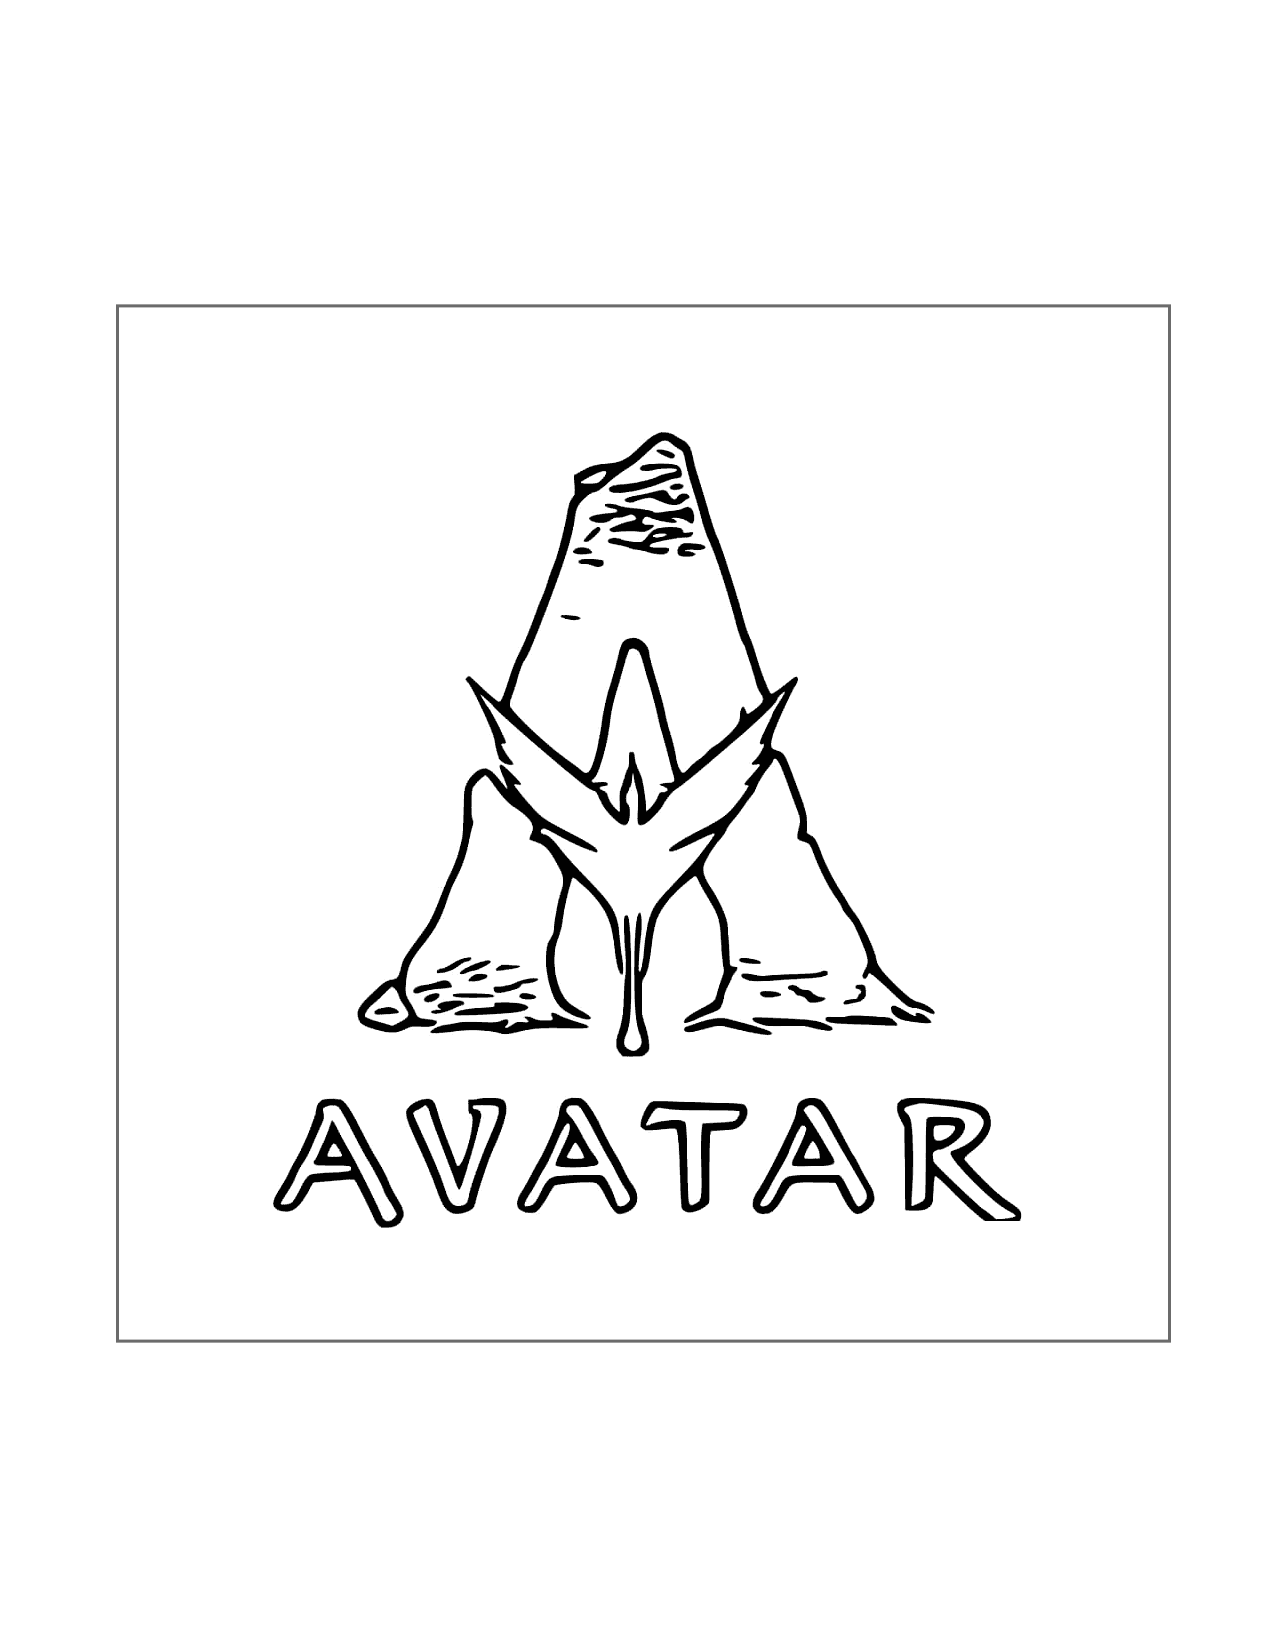 Avatar Movie Logo Coloring Page